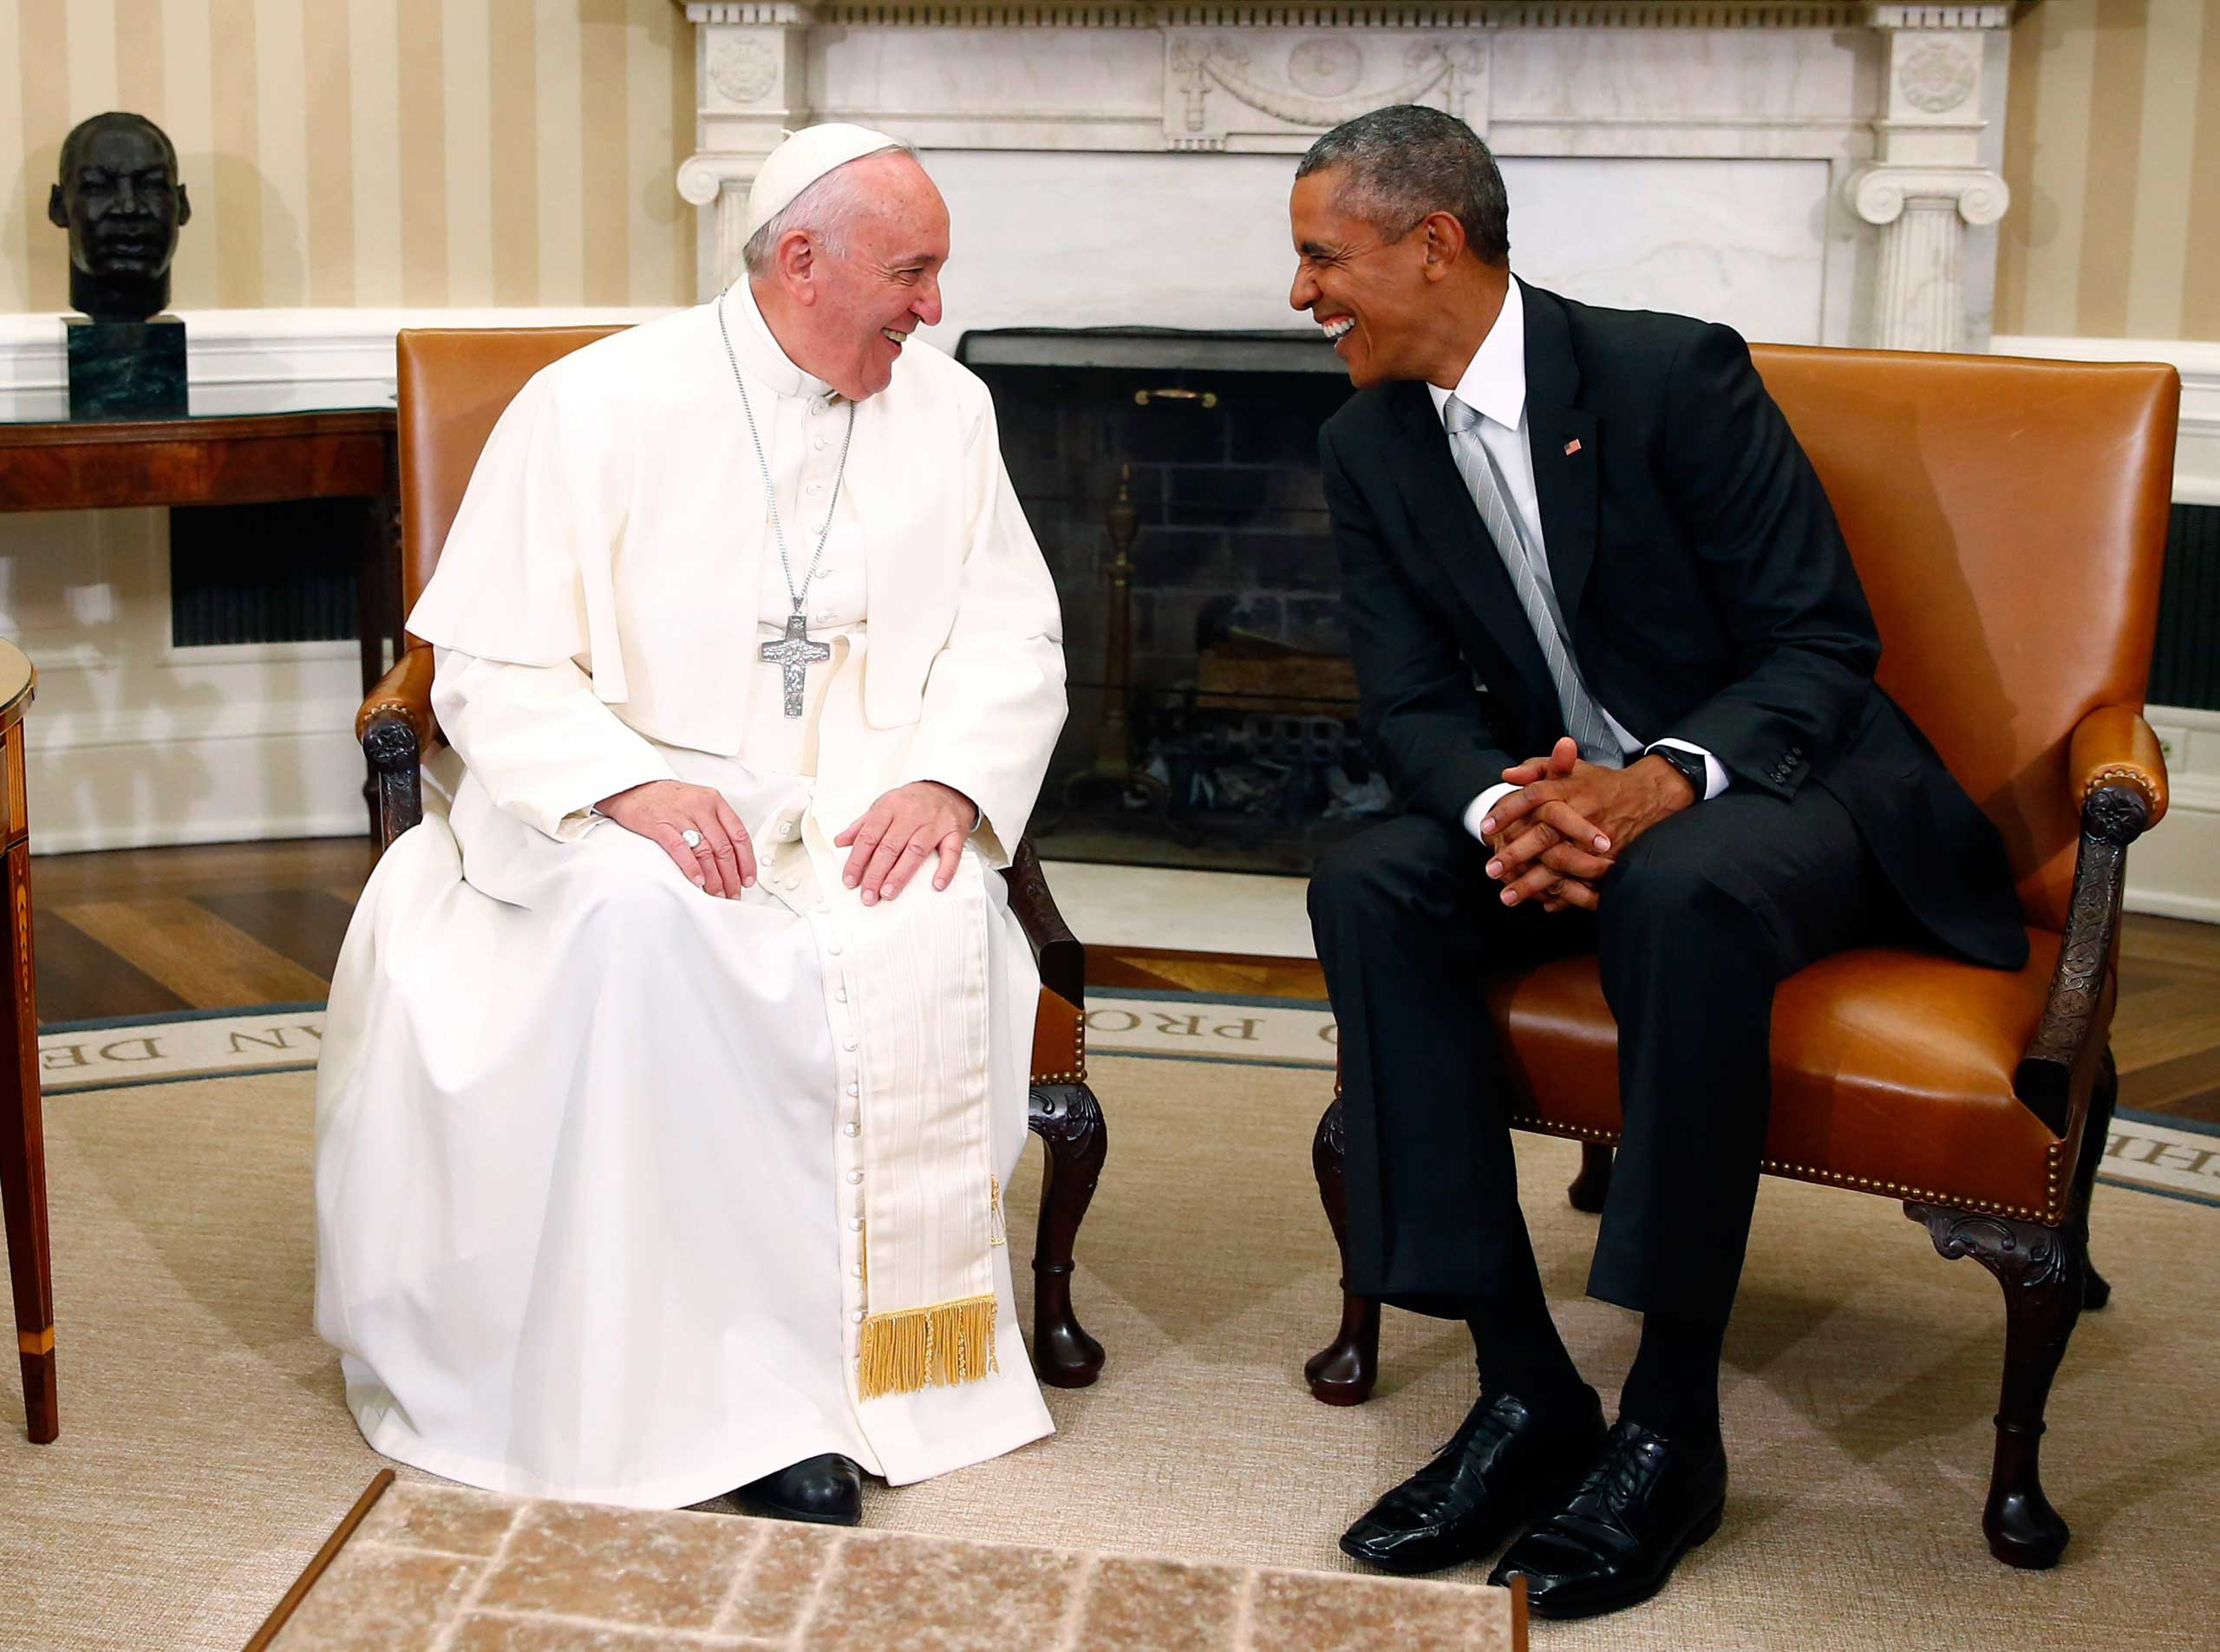 President Barack Obama talks with Pope Francis in the Oval Office of the White House in Washington, on Sept. 23, 2015.